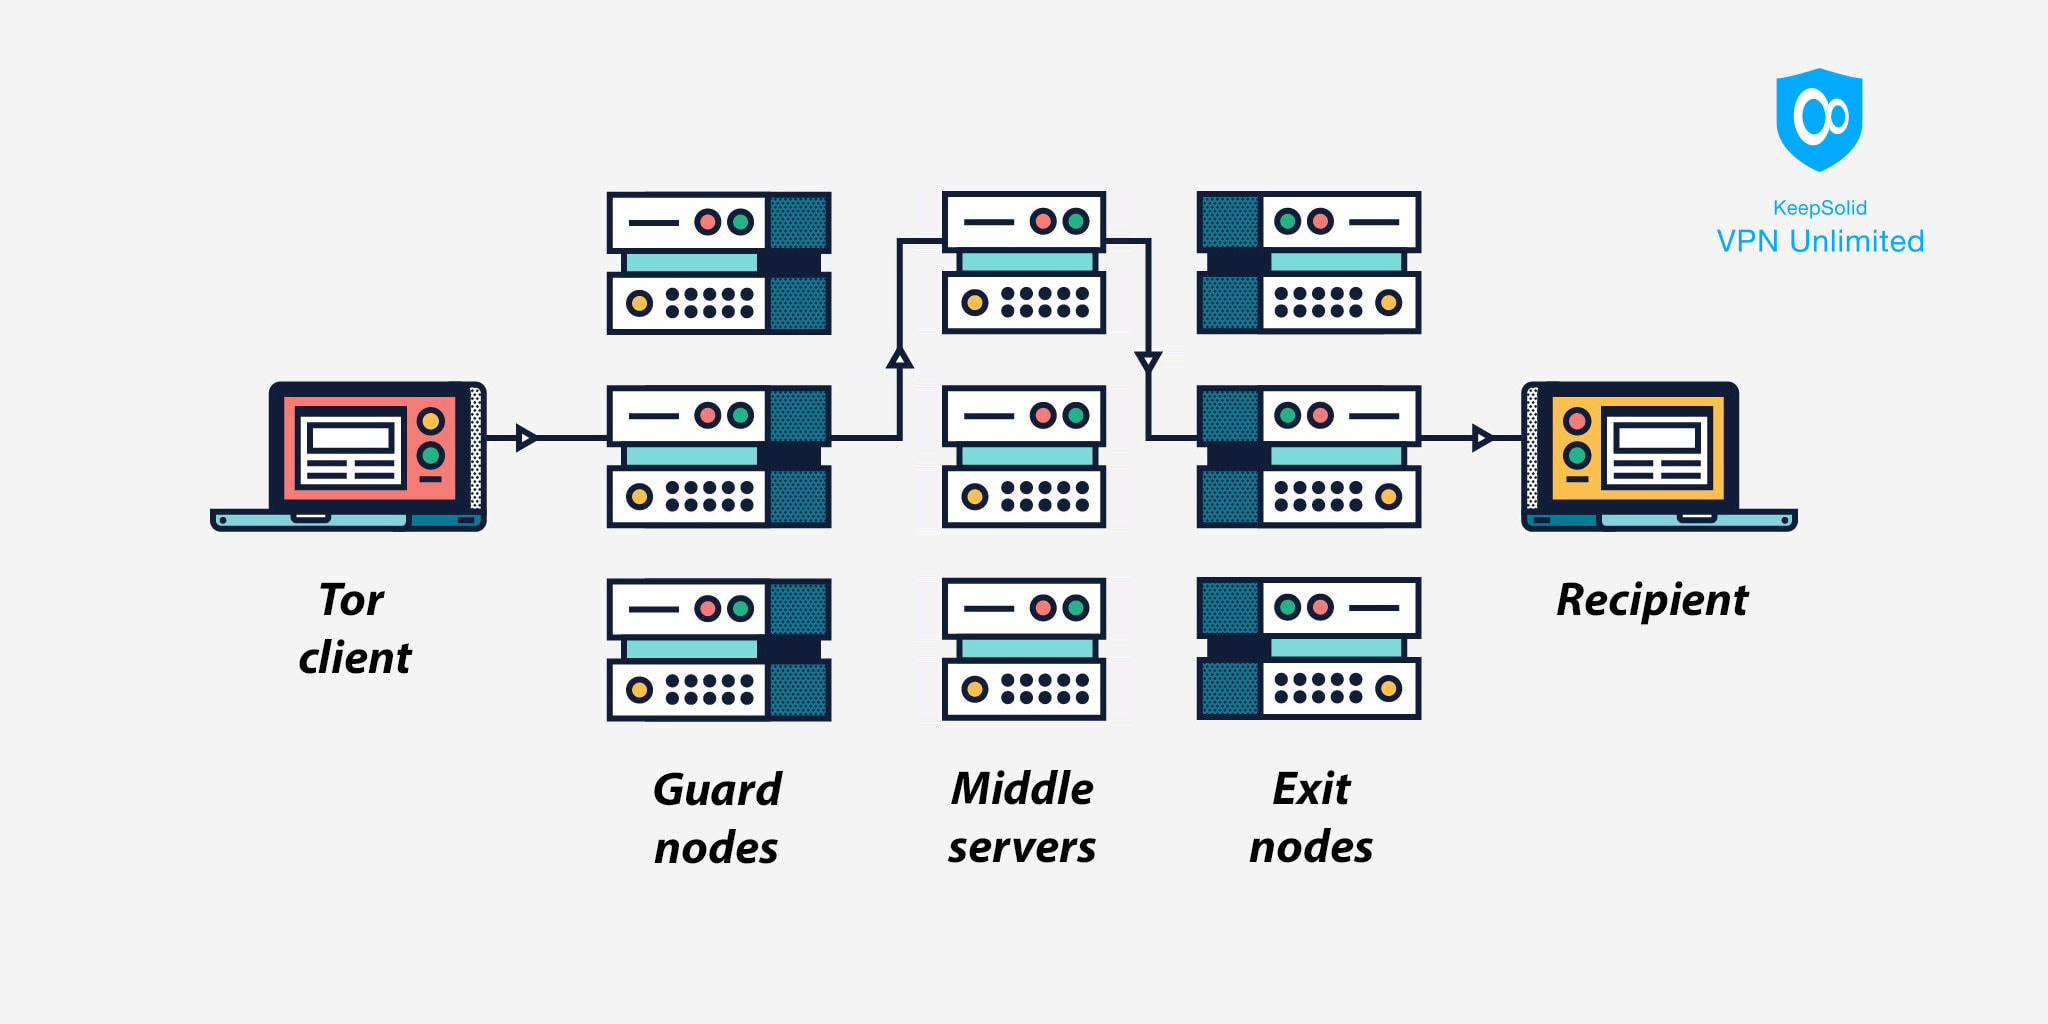 How Tor works - Tor network with guard nodes, middle servers, and exit nodes